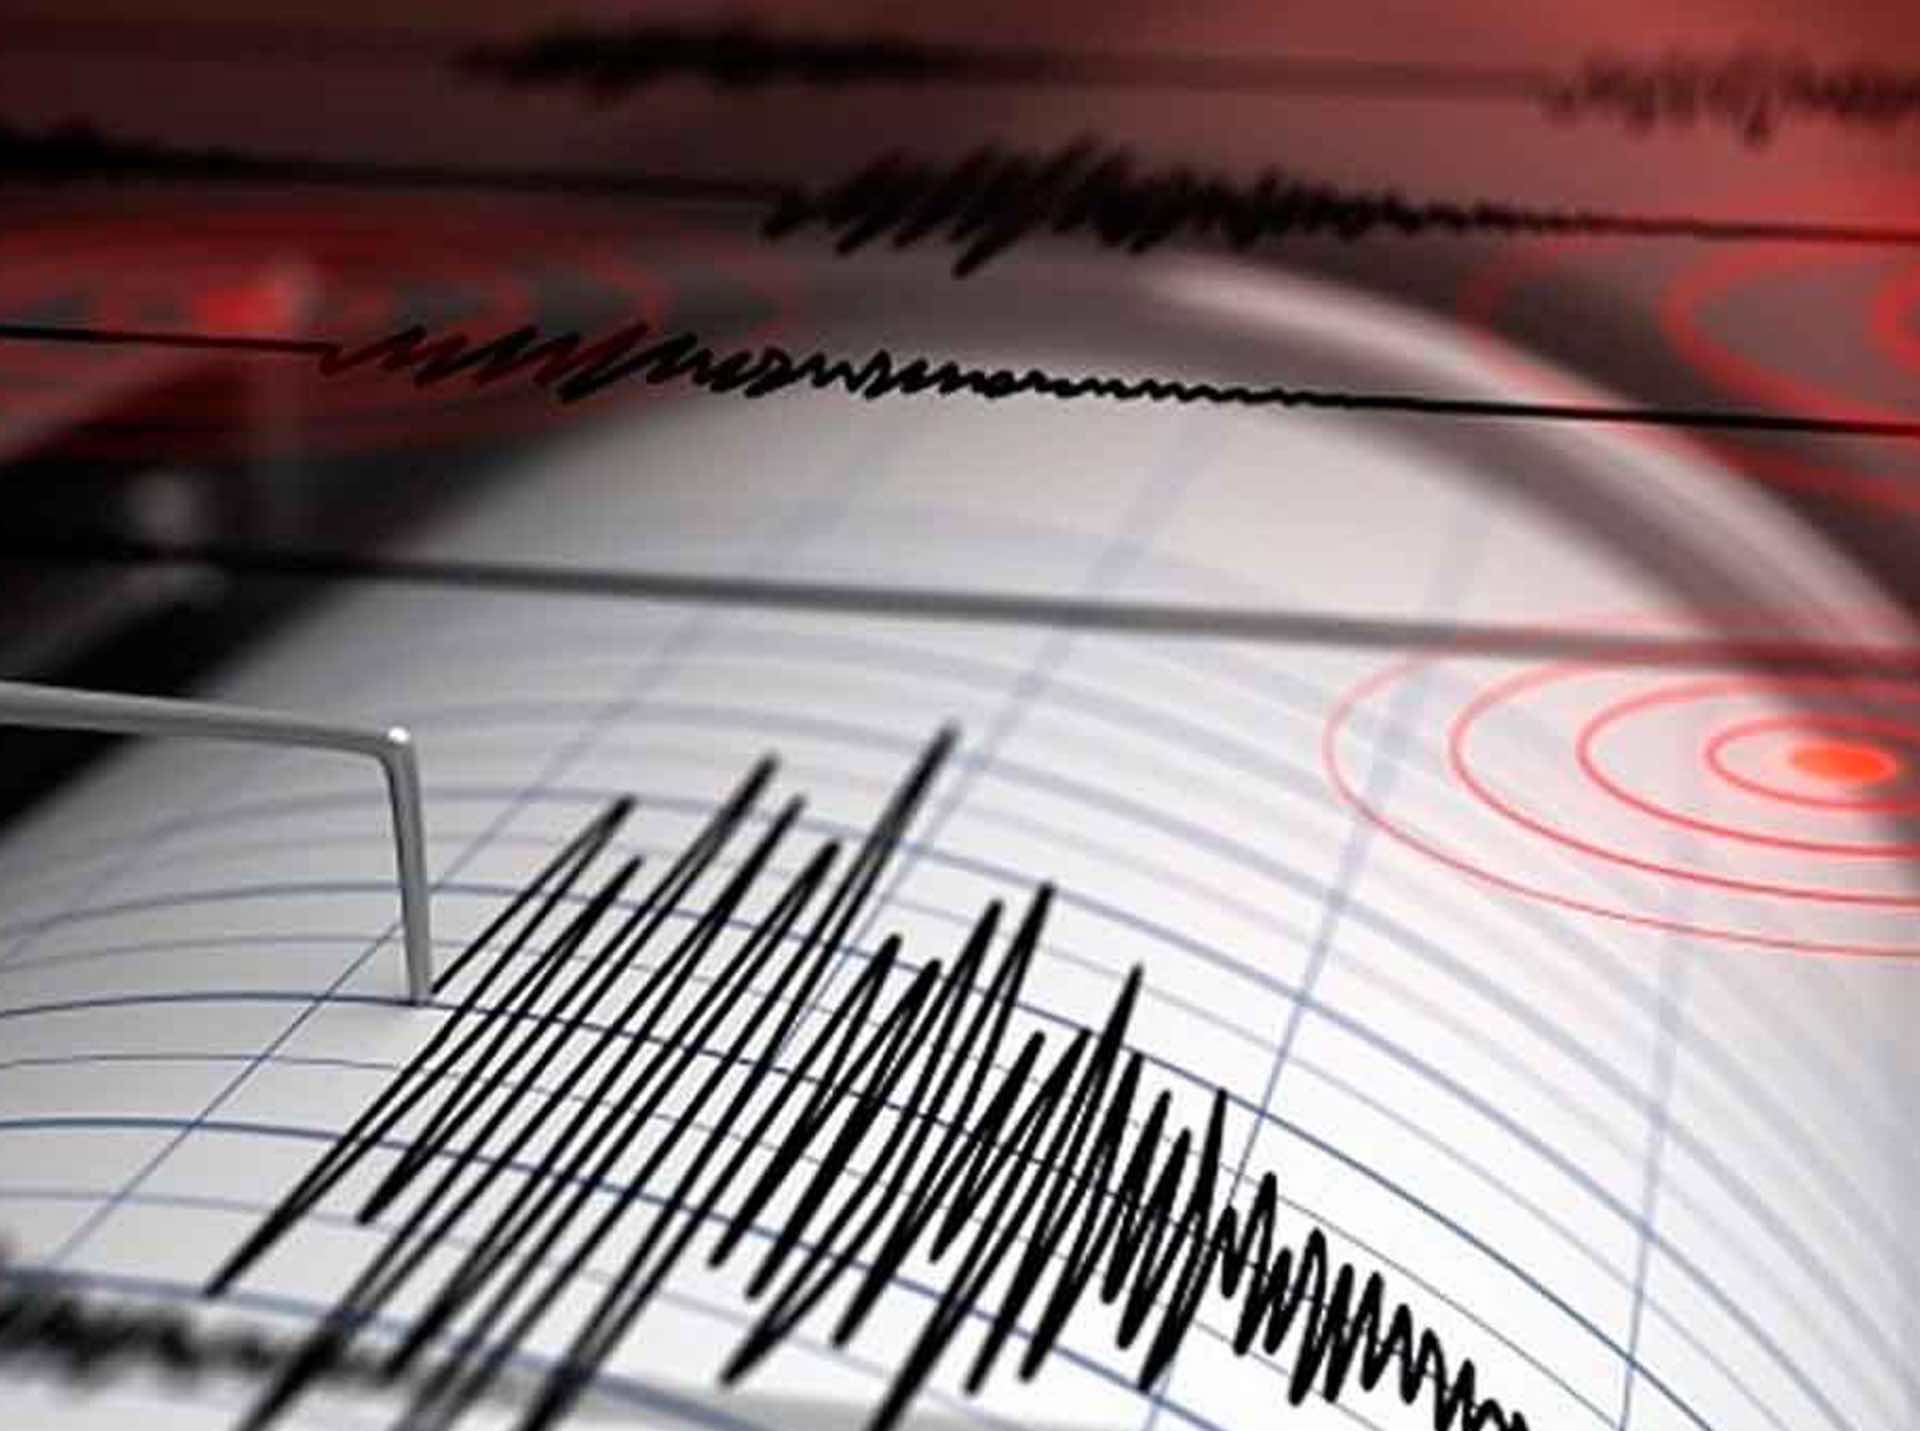 Western Turkey is jolted by a quake of magnitude 4.3